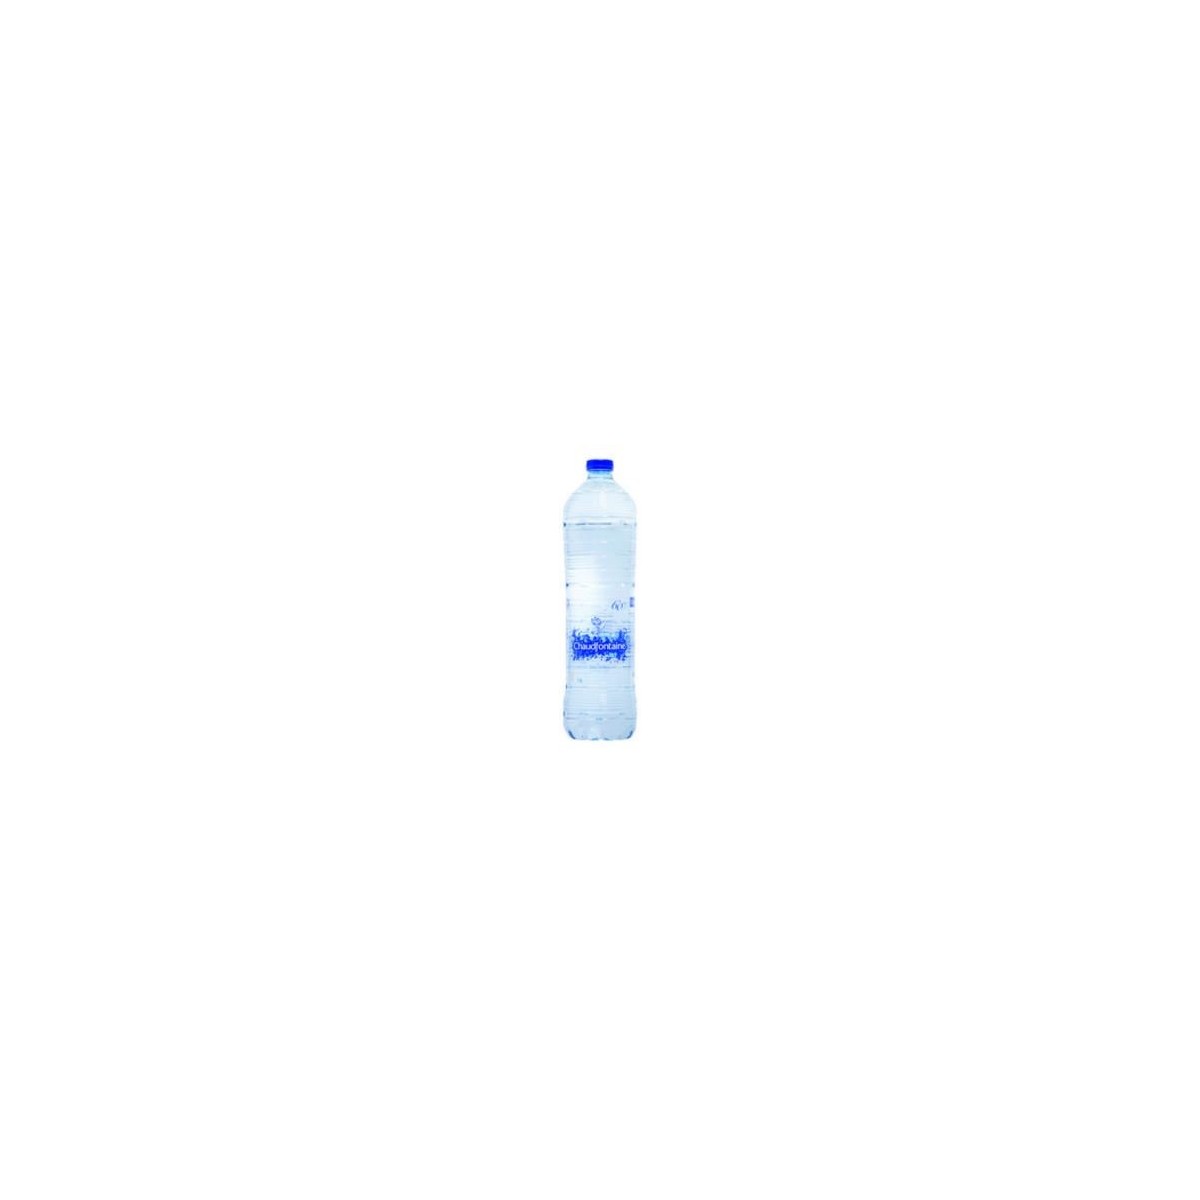 CHAUDFONTAINE STILL WATER 6 X 1.5L BOTTLE  TRAY